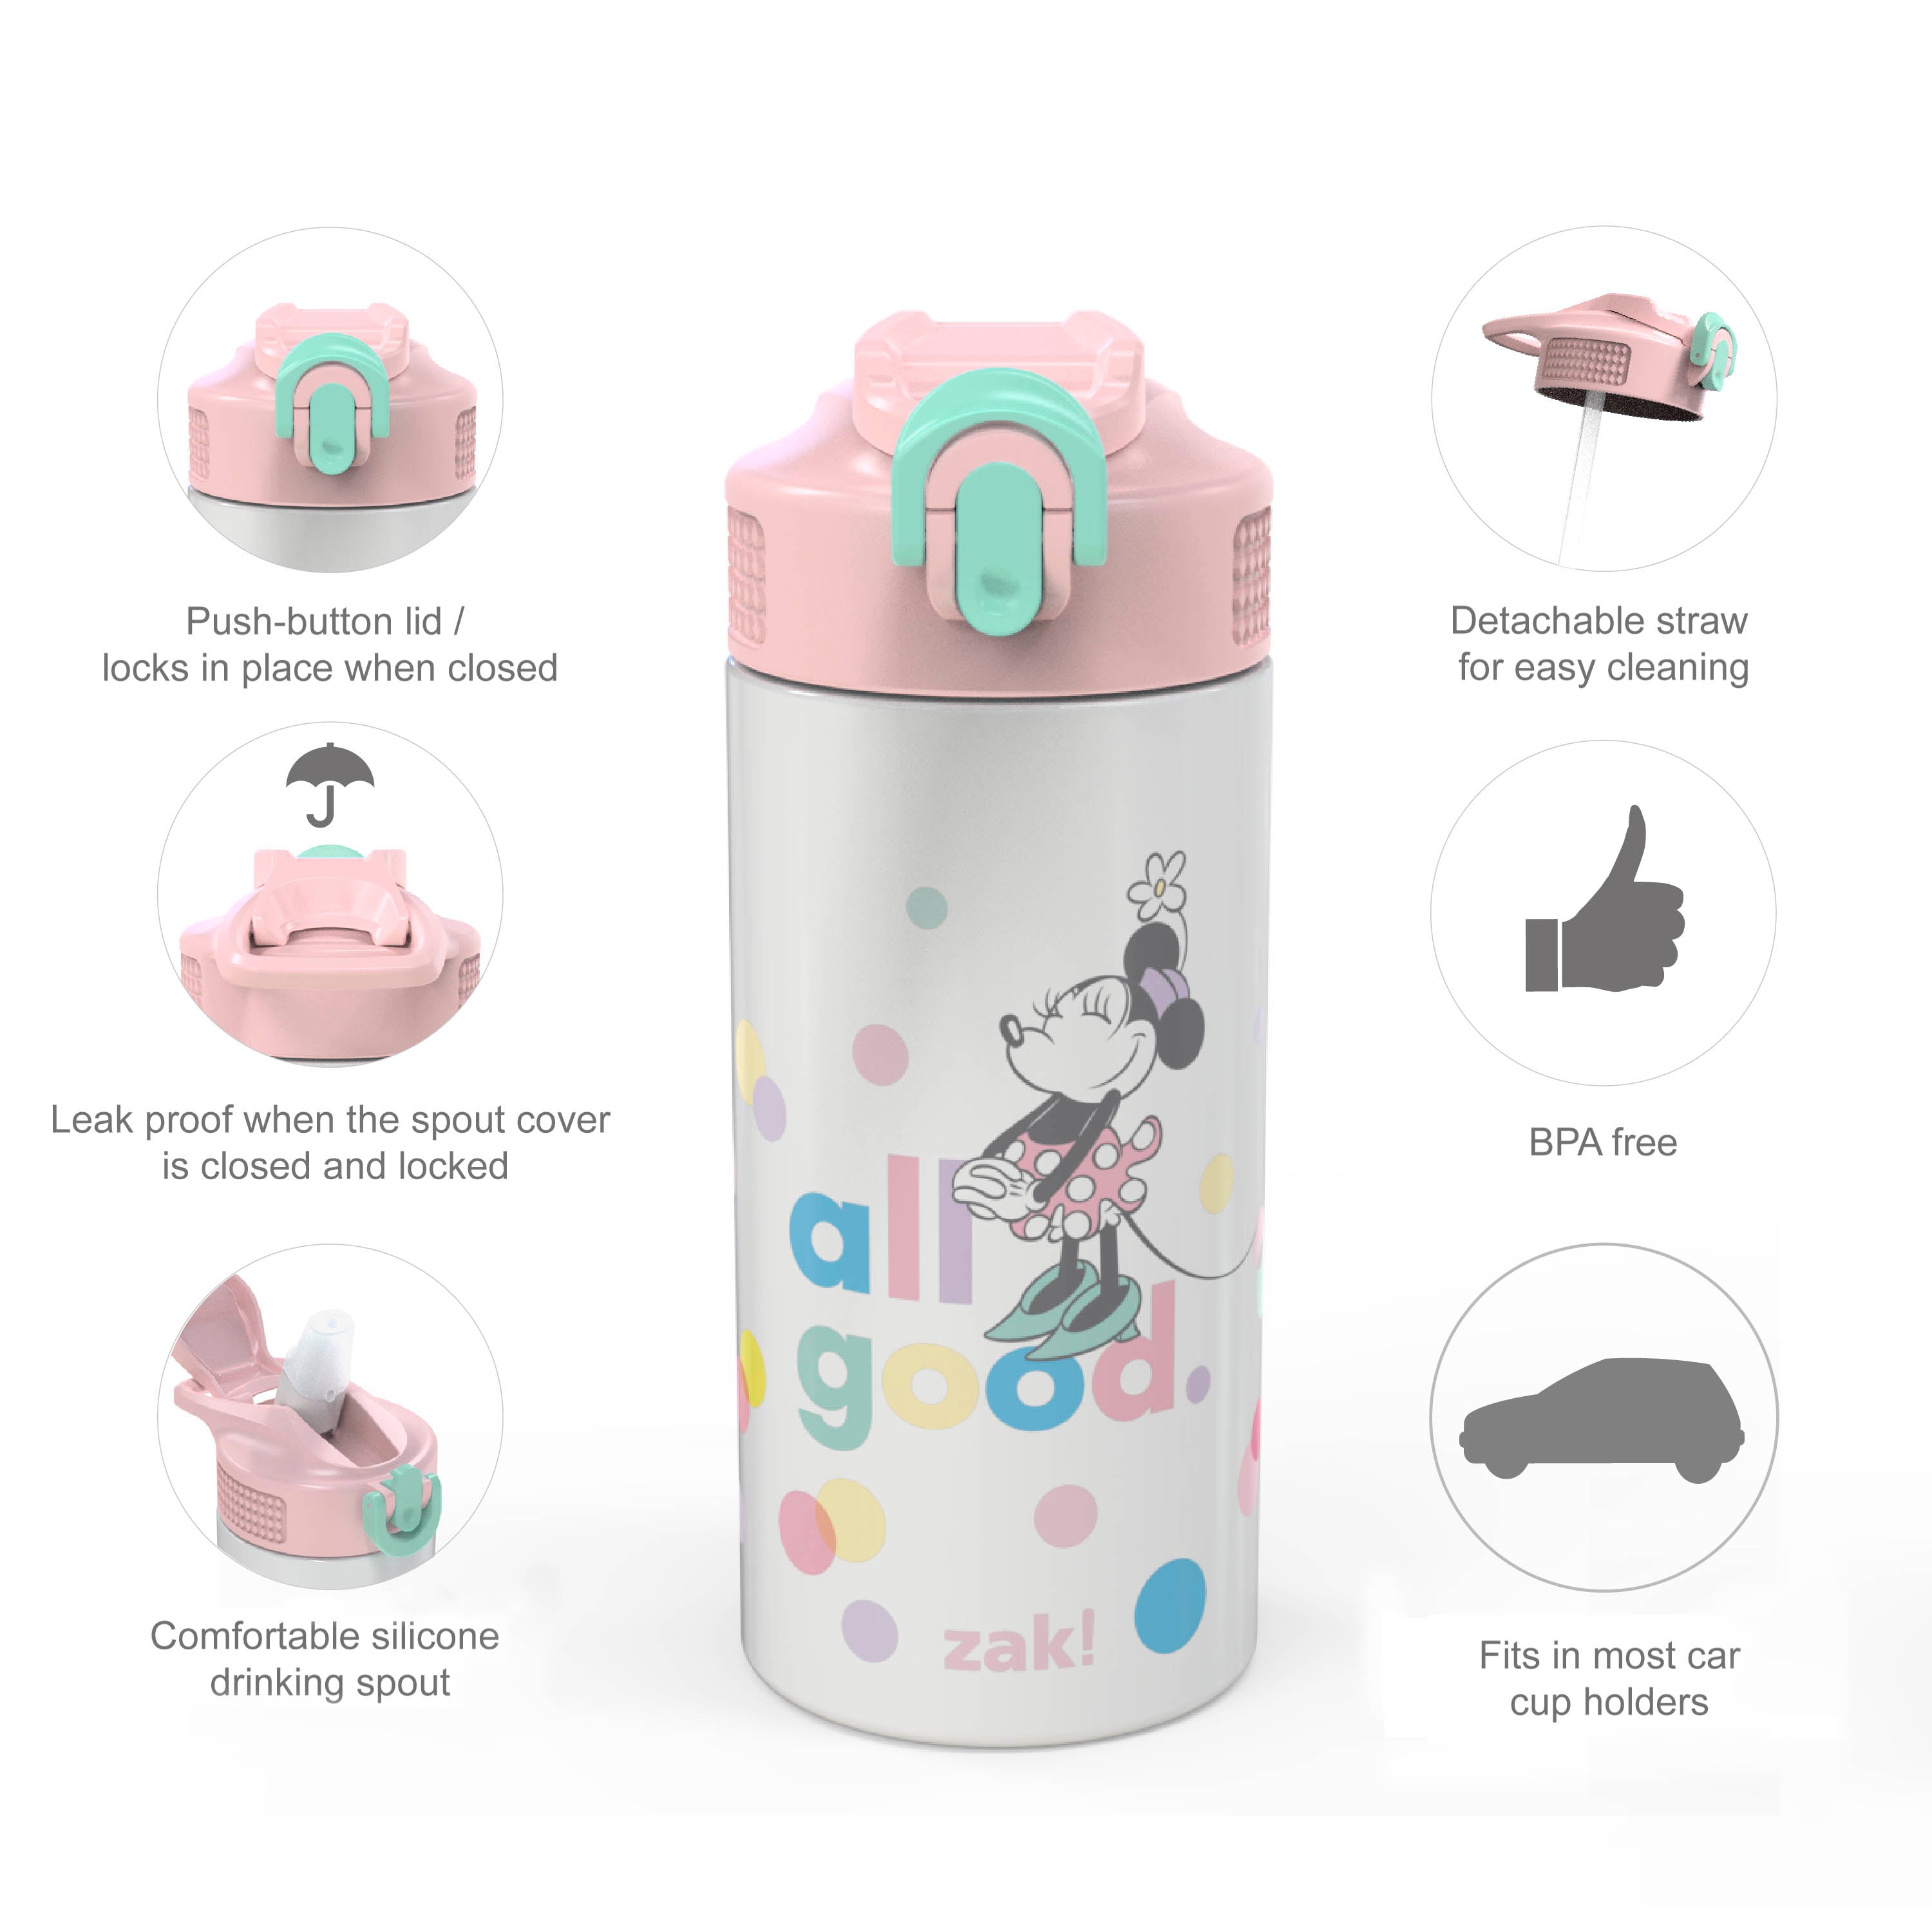 Disney Minnie Mouse Kids Stainless Steel Leak Proof Water Bottle with Push Button Lid and Spout